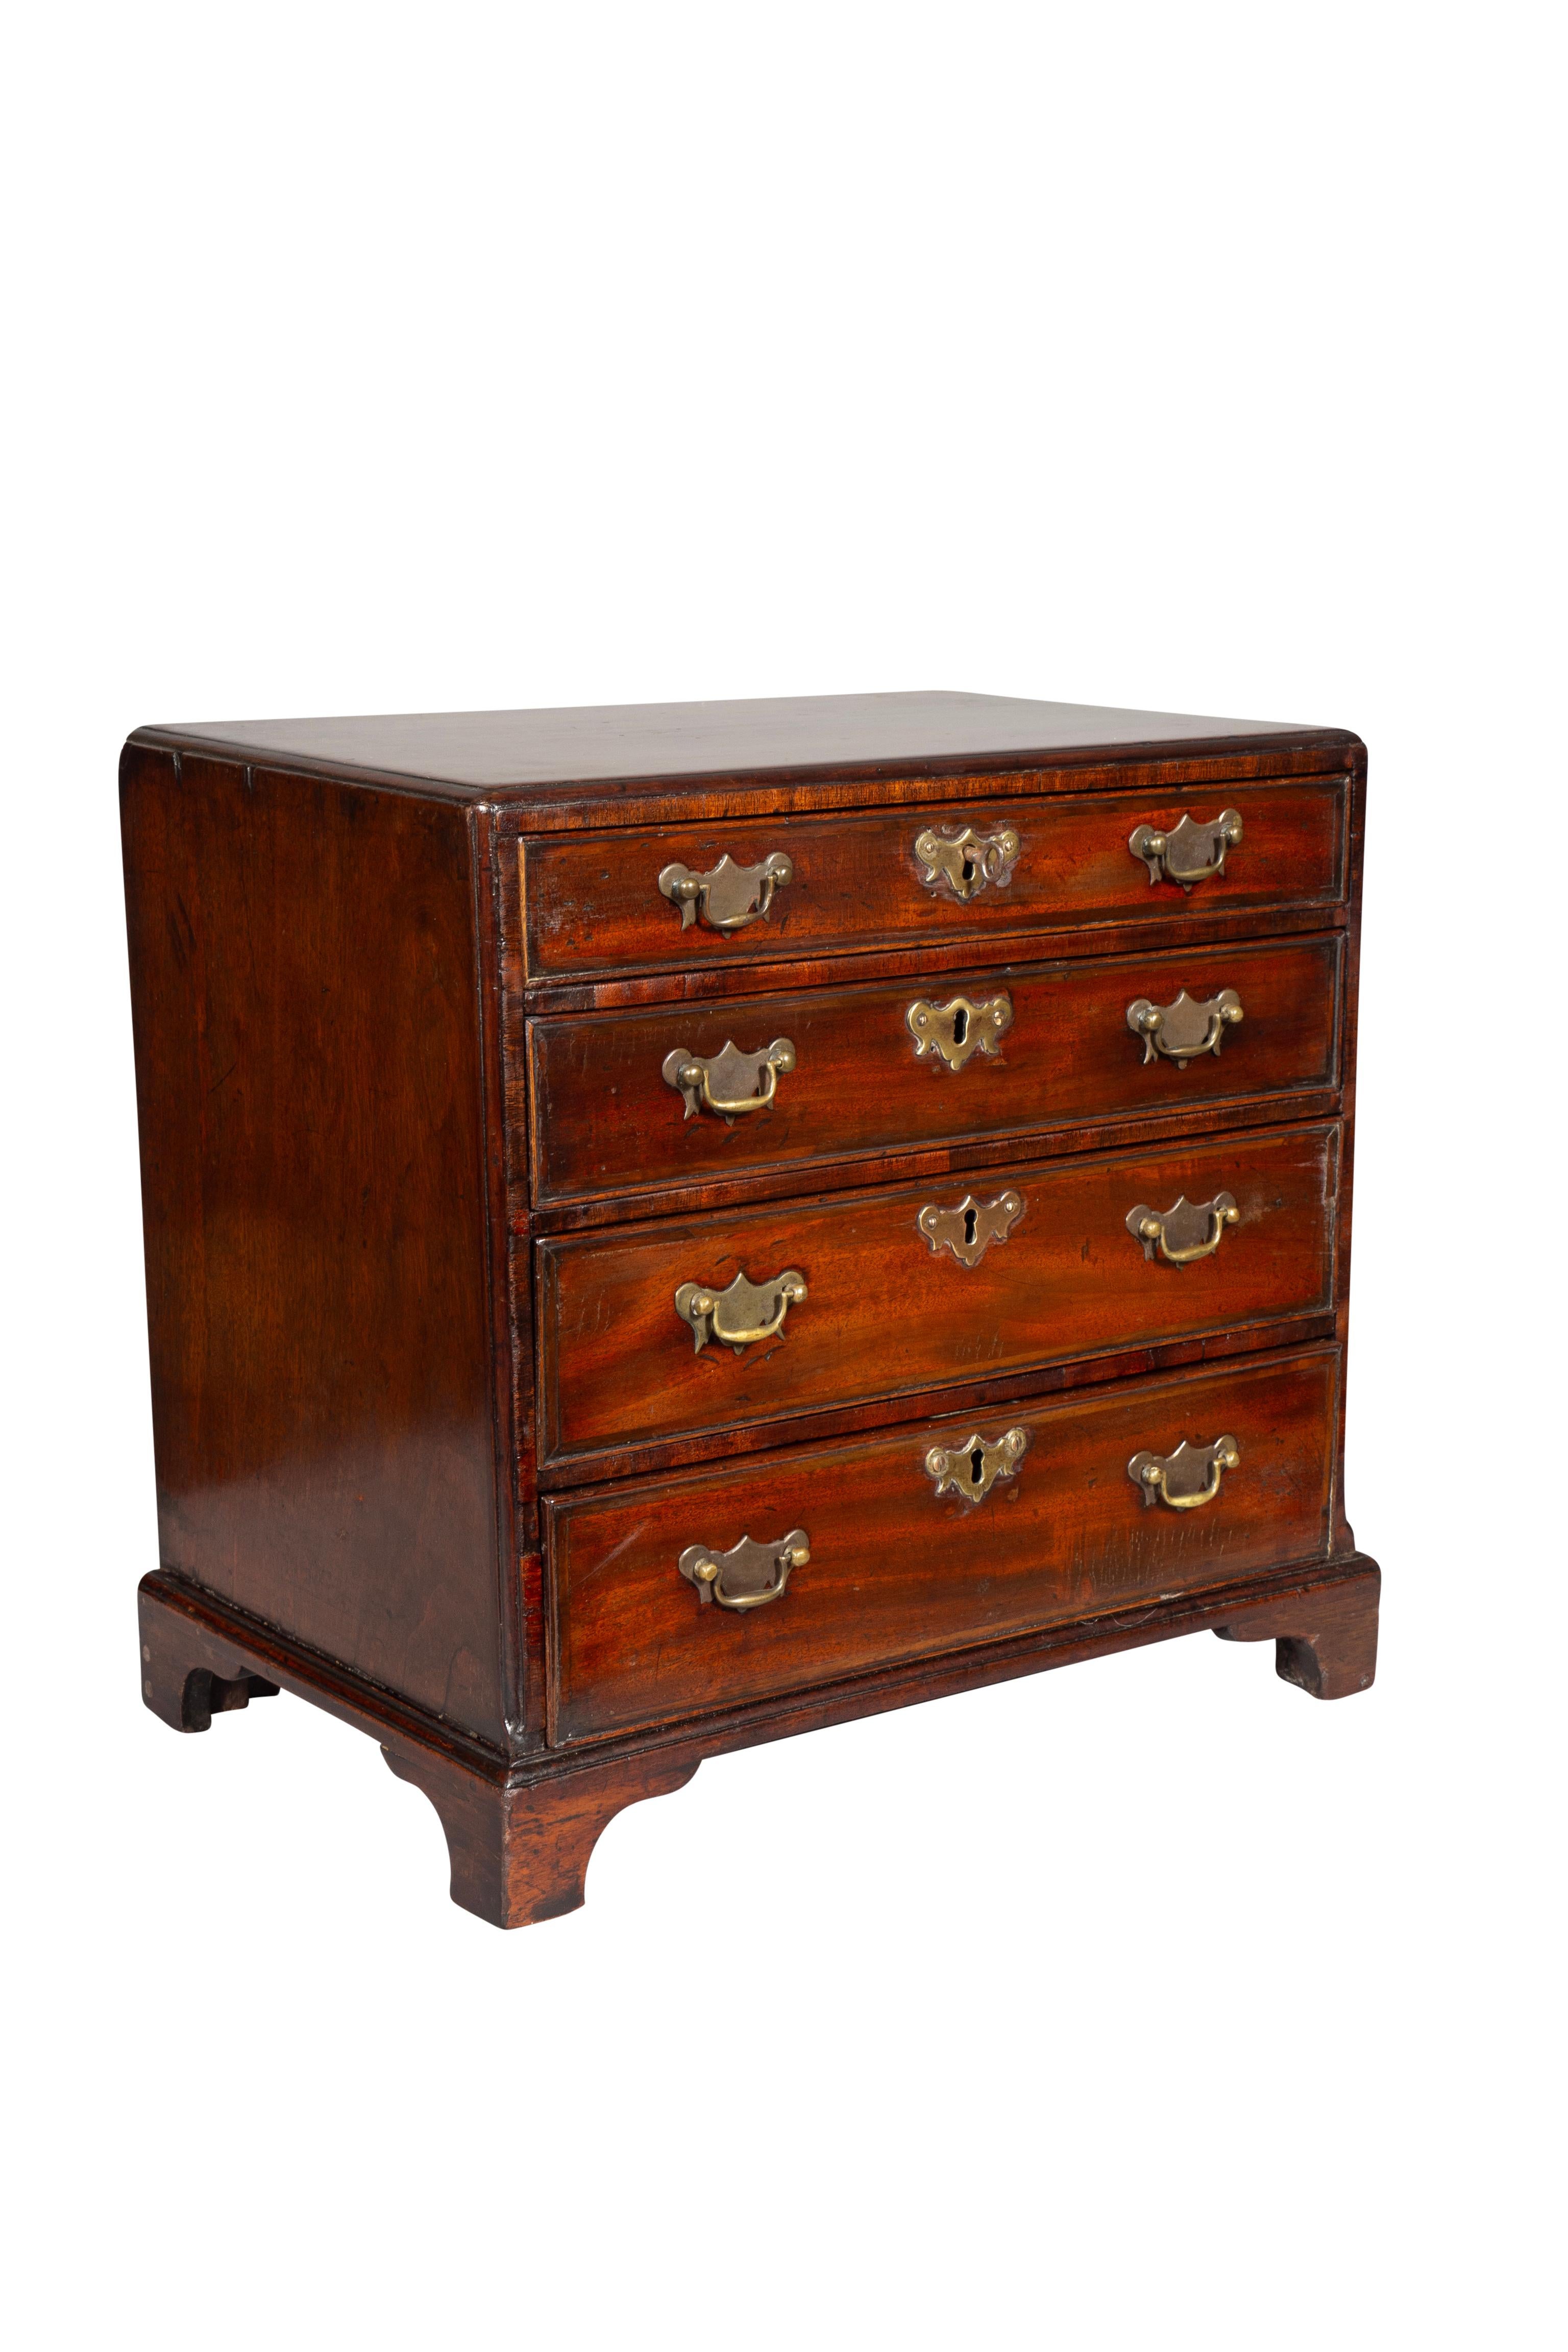 Rectangular with a caddy top over four drawers with bracket feet. These were made by furniture makers for family members and friends. Also used to promote a cabinetmakers skills.